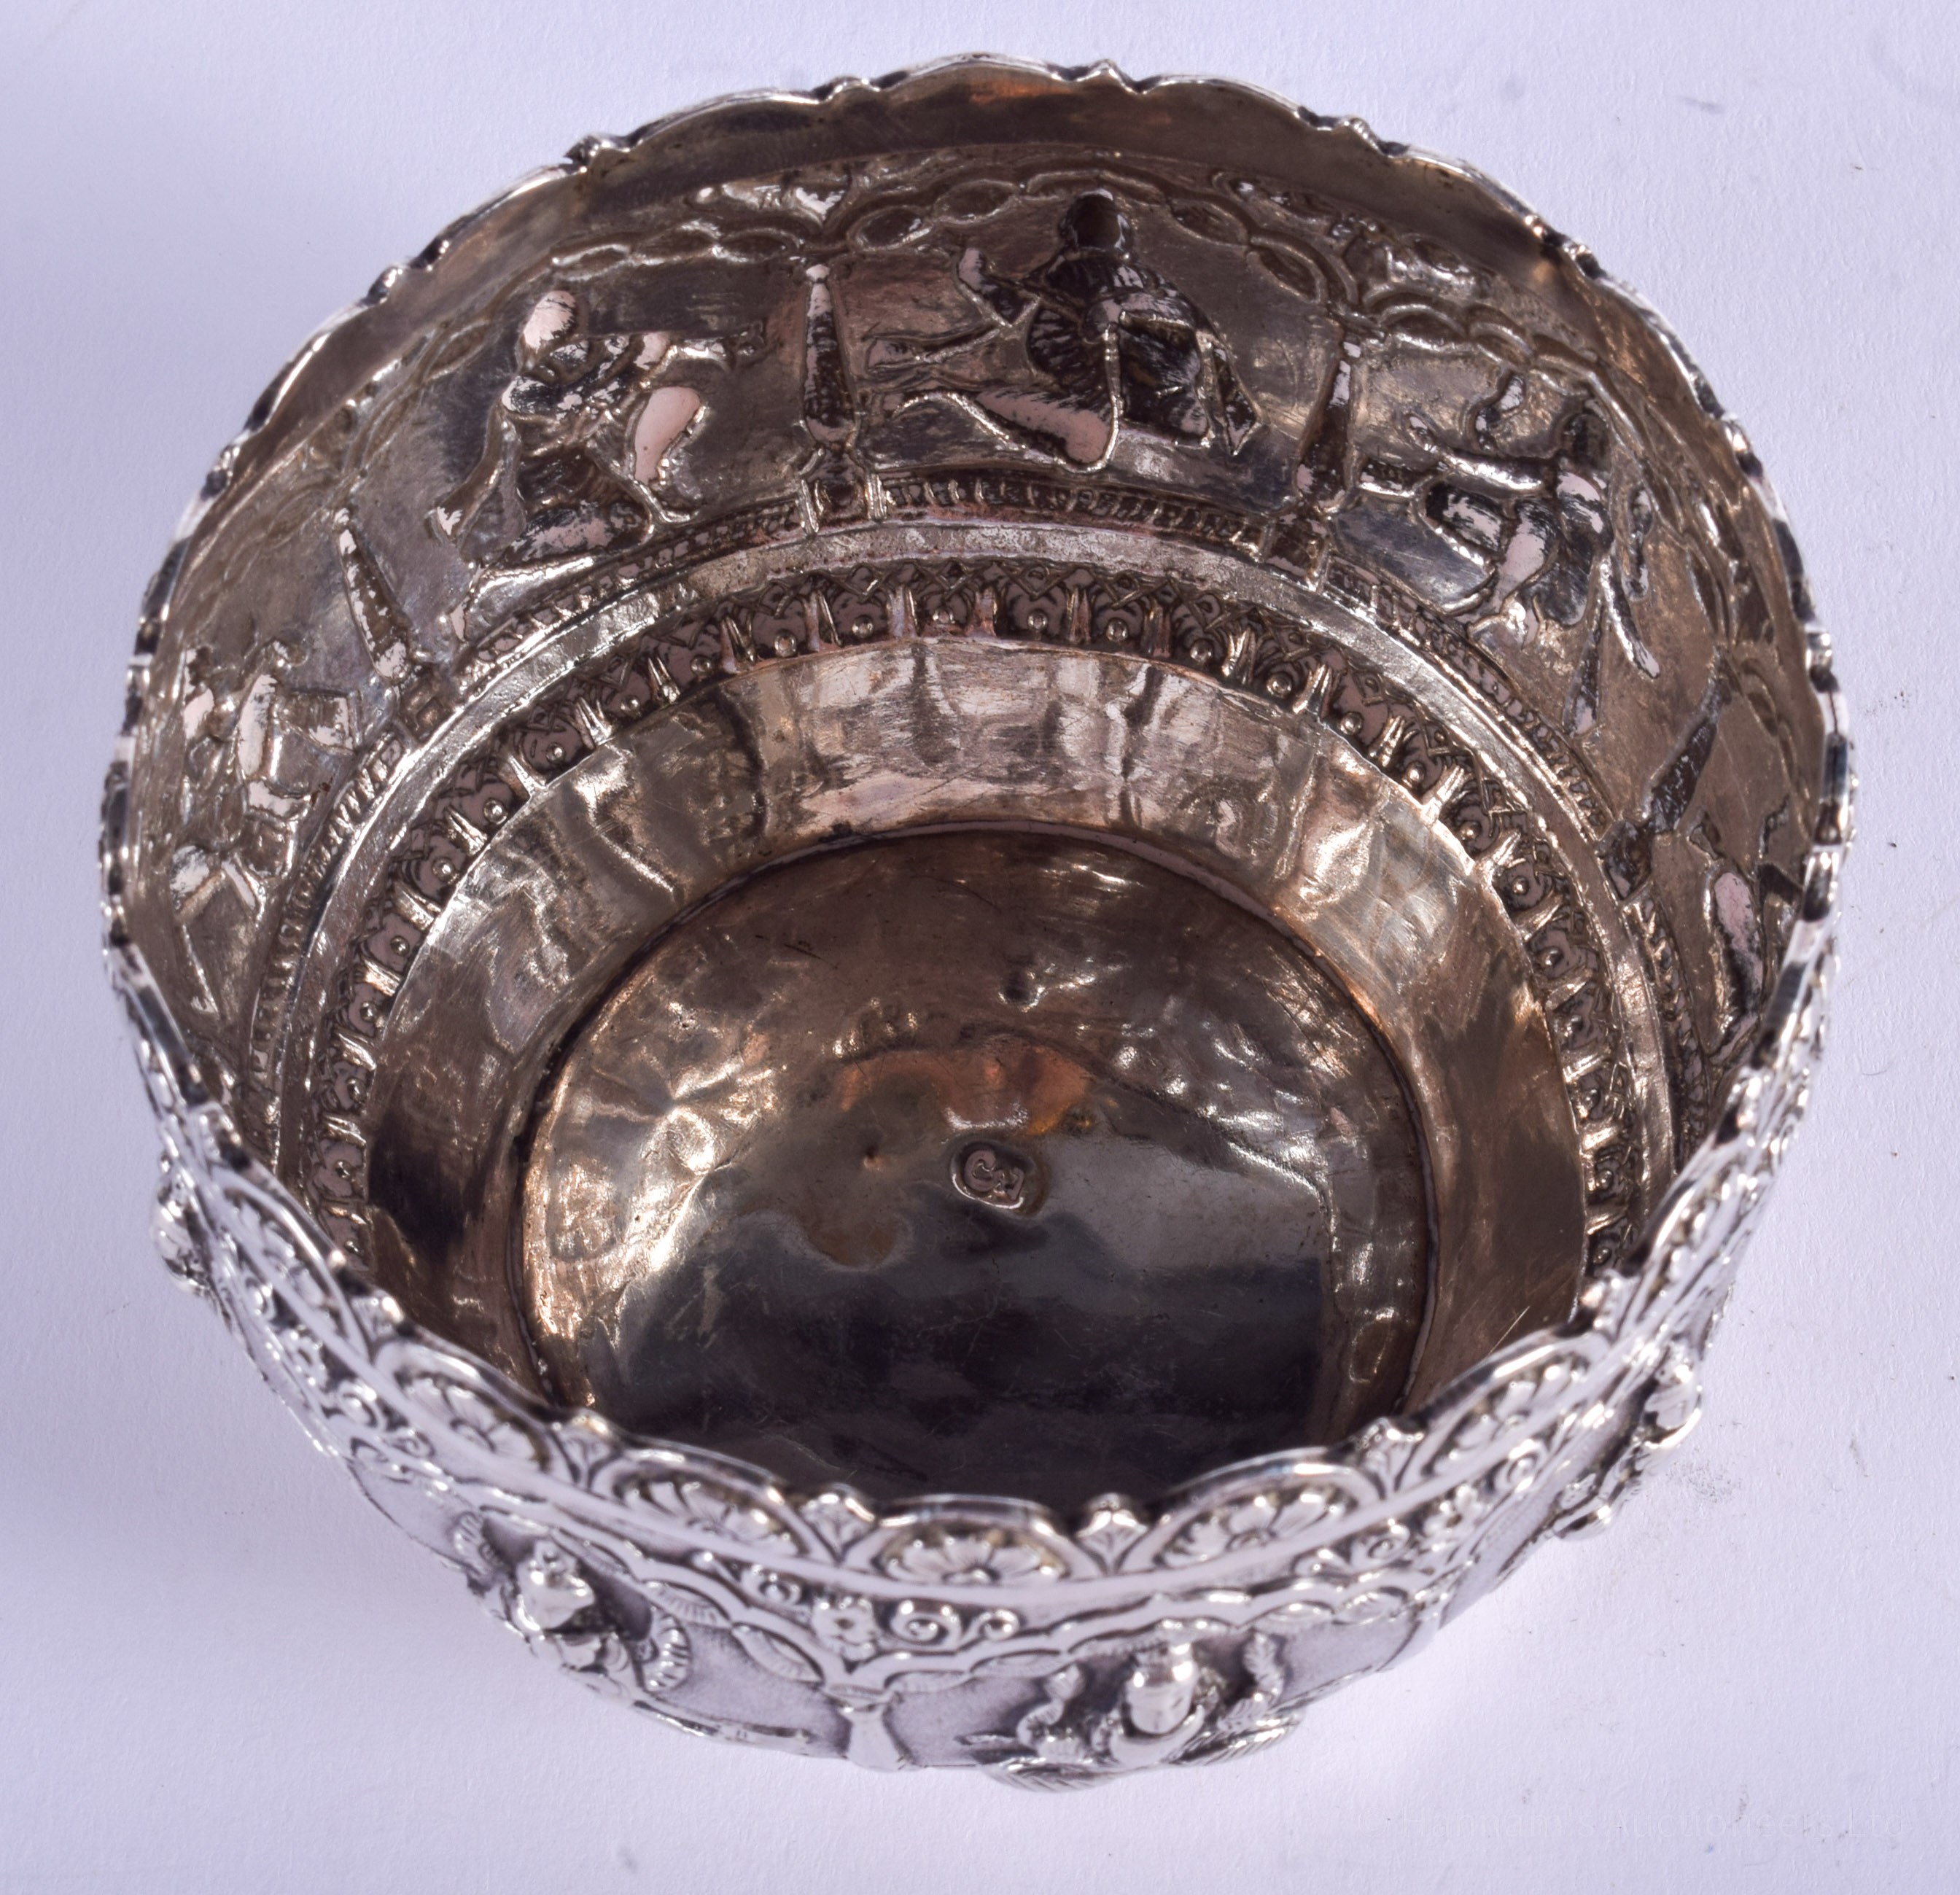 A VERY UNUSUAL ENGLISH SILVER INDIAN STYLE SUGAR BOWL. 95 grams. 9.5 cm wide. - Image 4 of 6